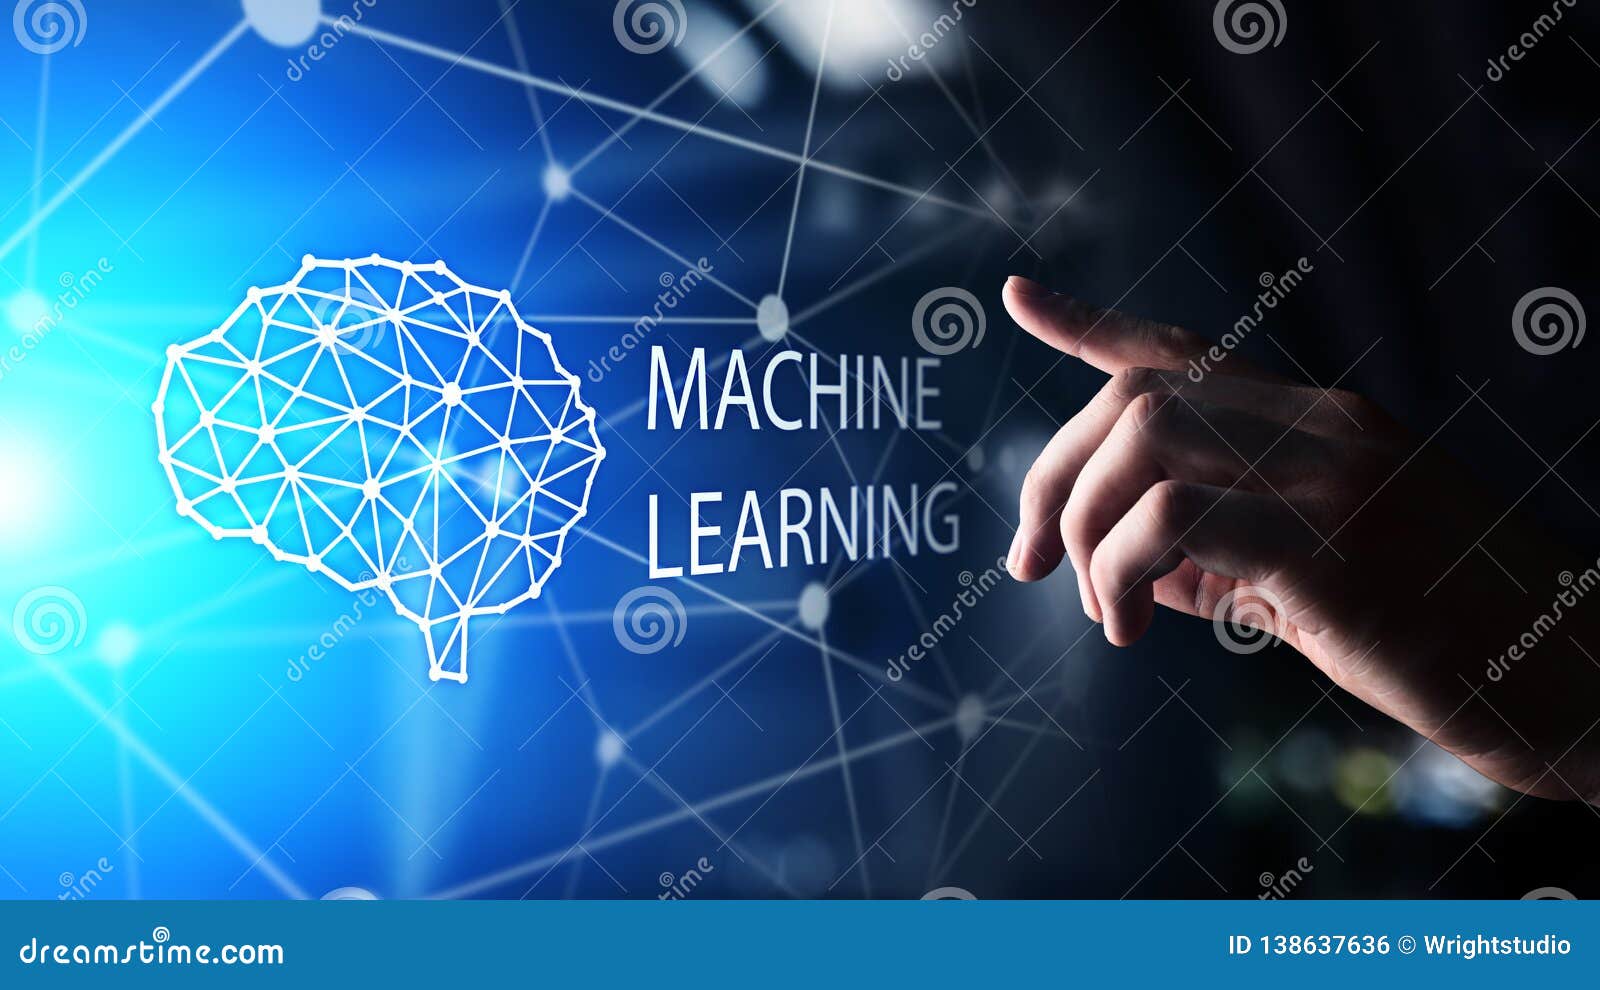 machine deep learning algorithms and ai artificial intelligence. internet and technology concept on virtual screen.